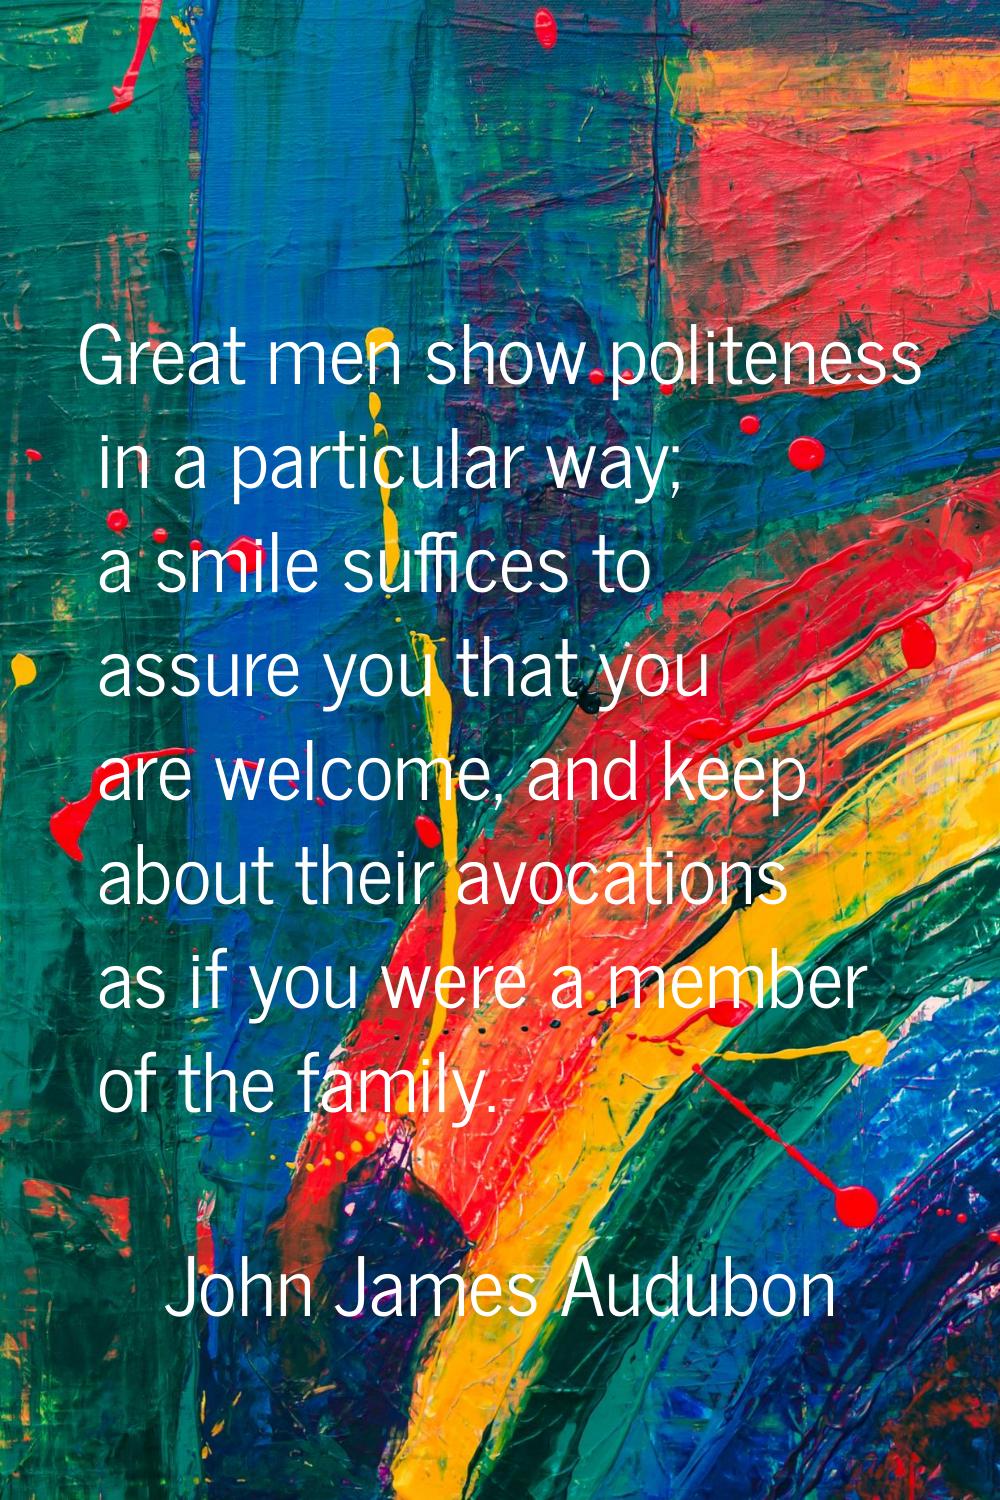 Great men show politeness in a particular way; a smile suffices to assure you that you are welcome,